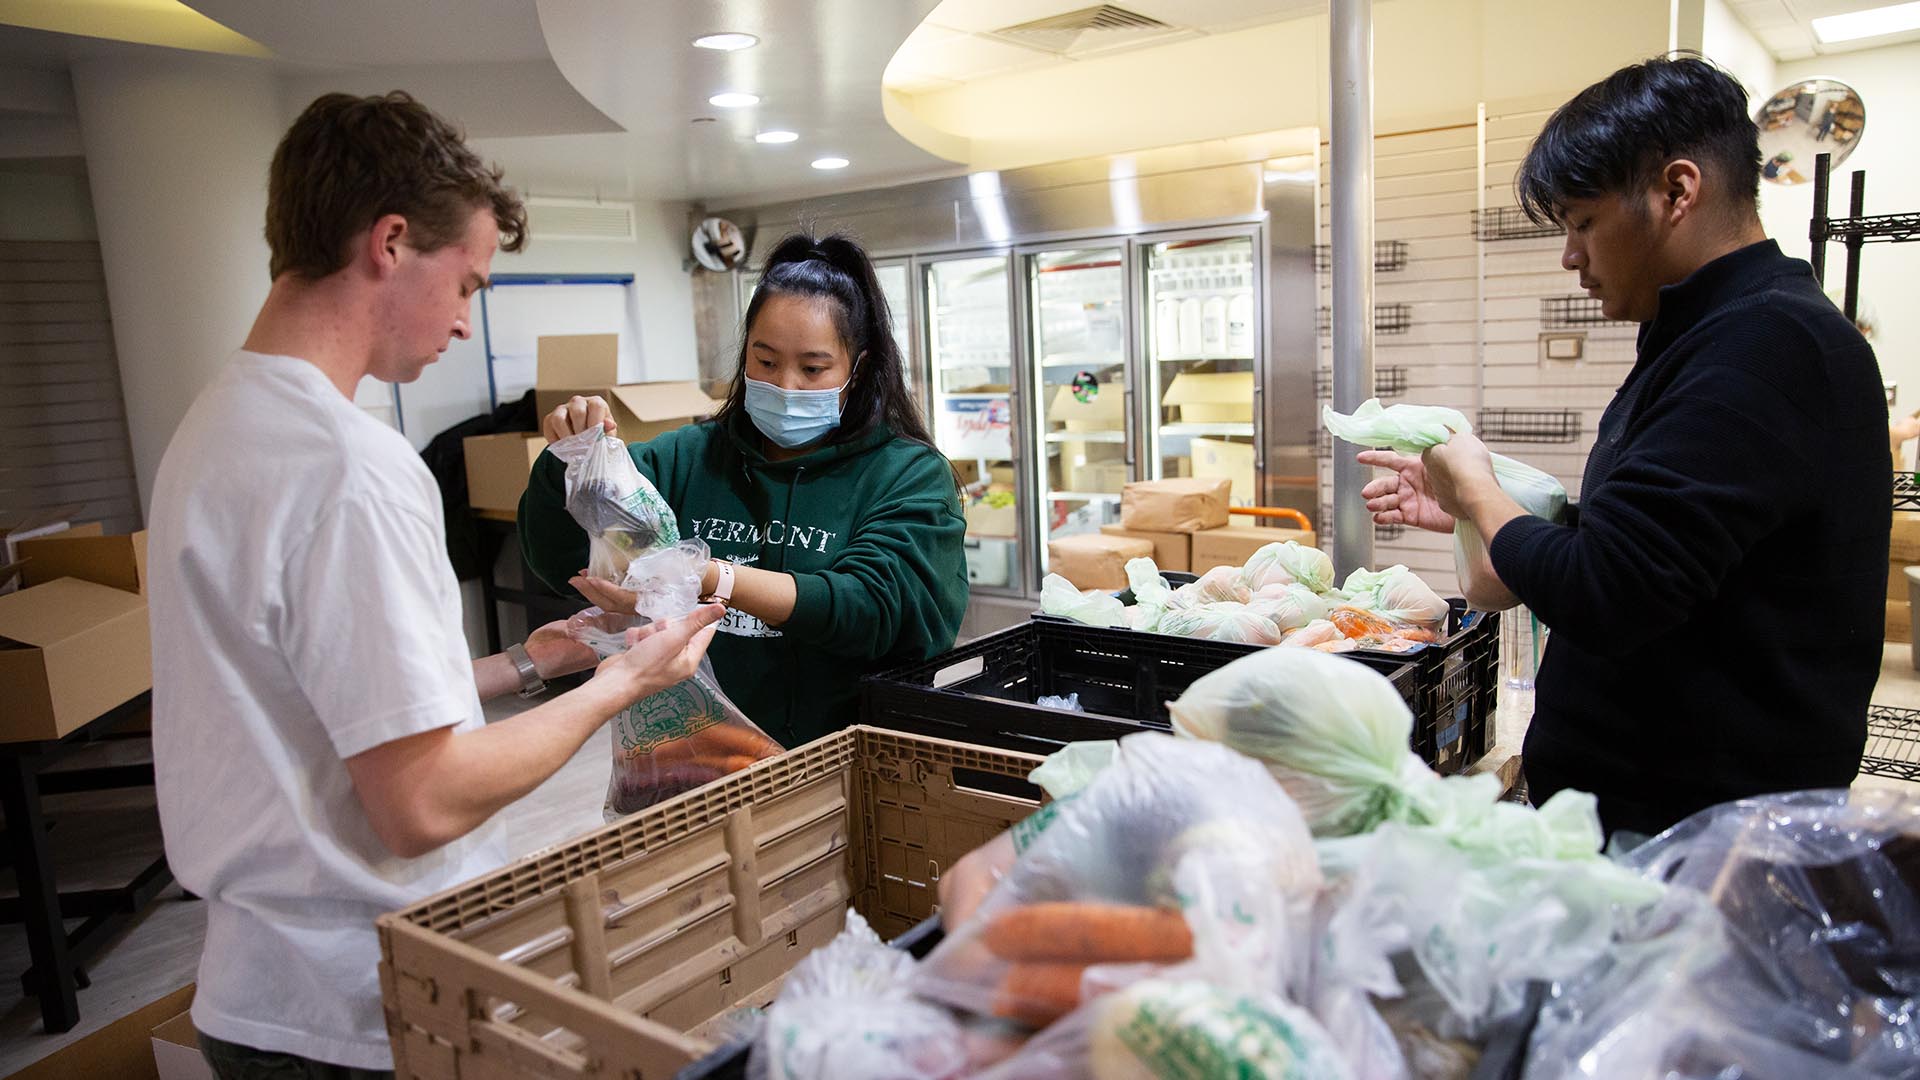 Food pantry student employee Hannah Hamilton and volunteers Wyatt Falborn (white t-shirt), Kolby Bautista and Abel Bautista (glasses) pack harvest boxes in Rowdy’s Corner, the new food pantry location in the Tivoli, on Wednesday, Nov. 16, 2022.